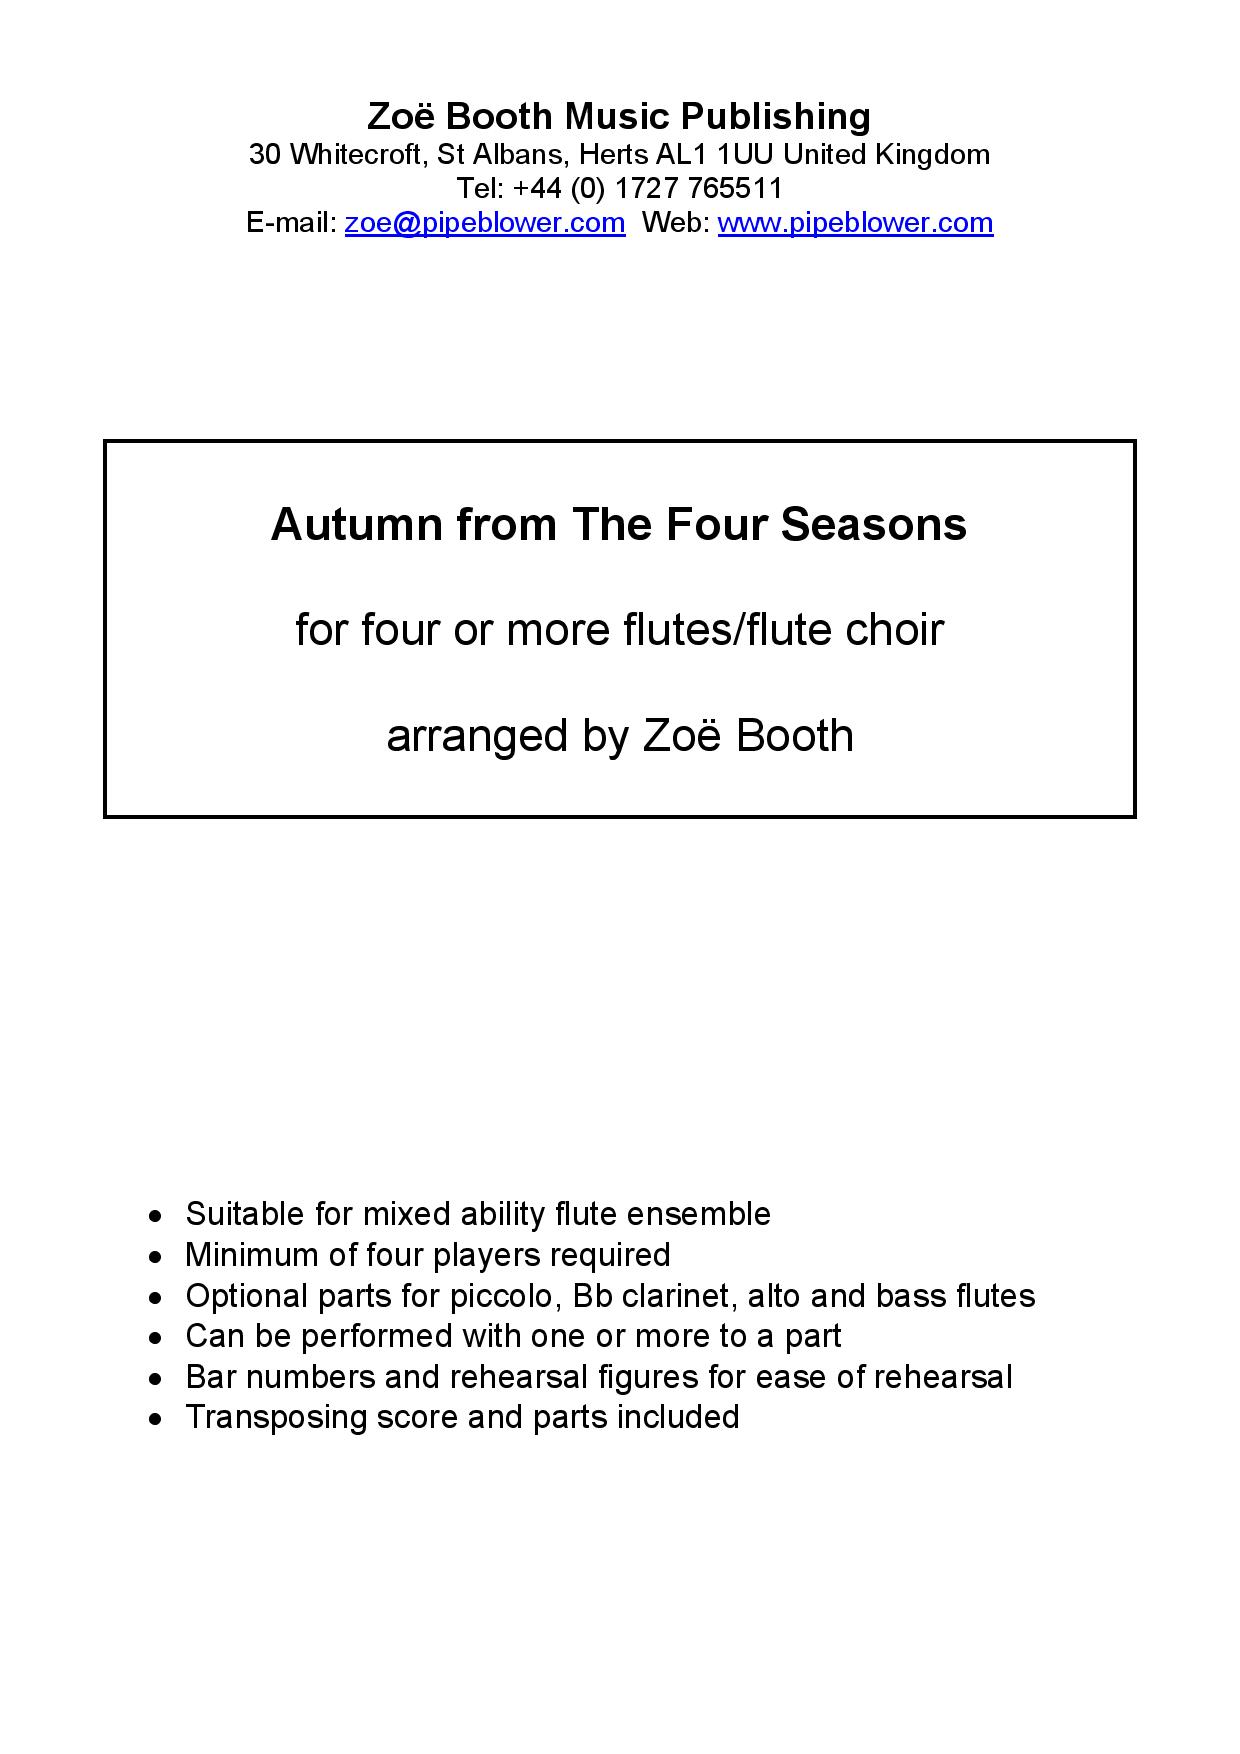 Autumn from The Four Seasons by Vivaldi  arranged by Zoë Booth for four or more flutes/flute choir